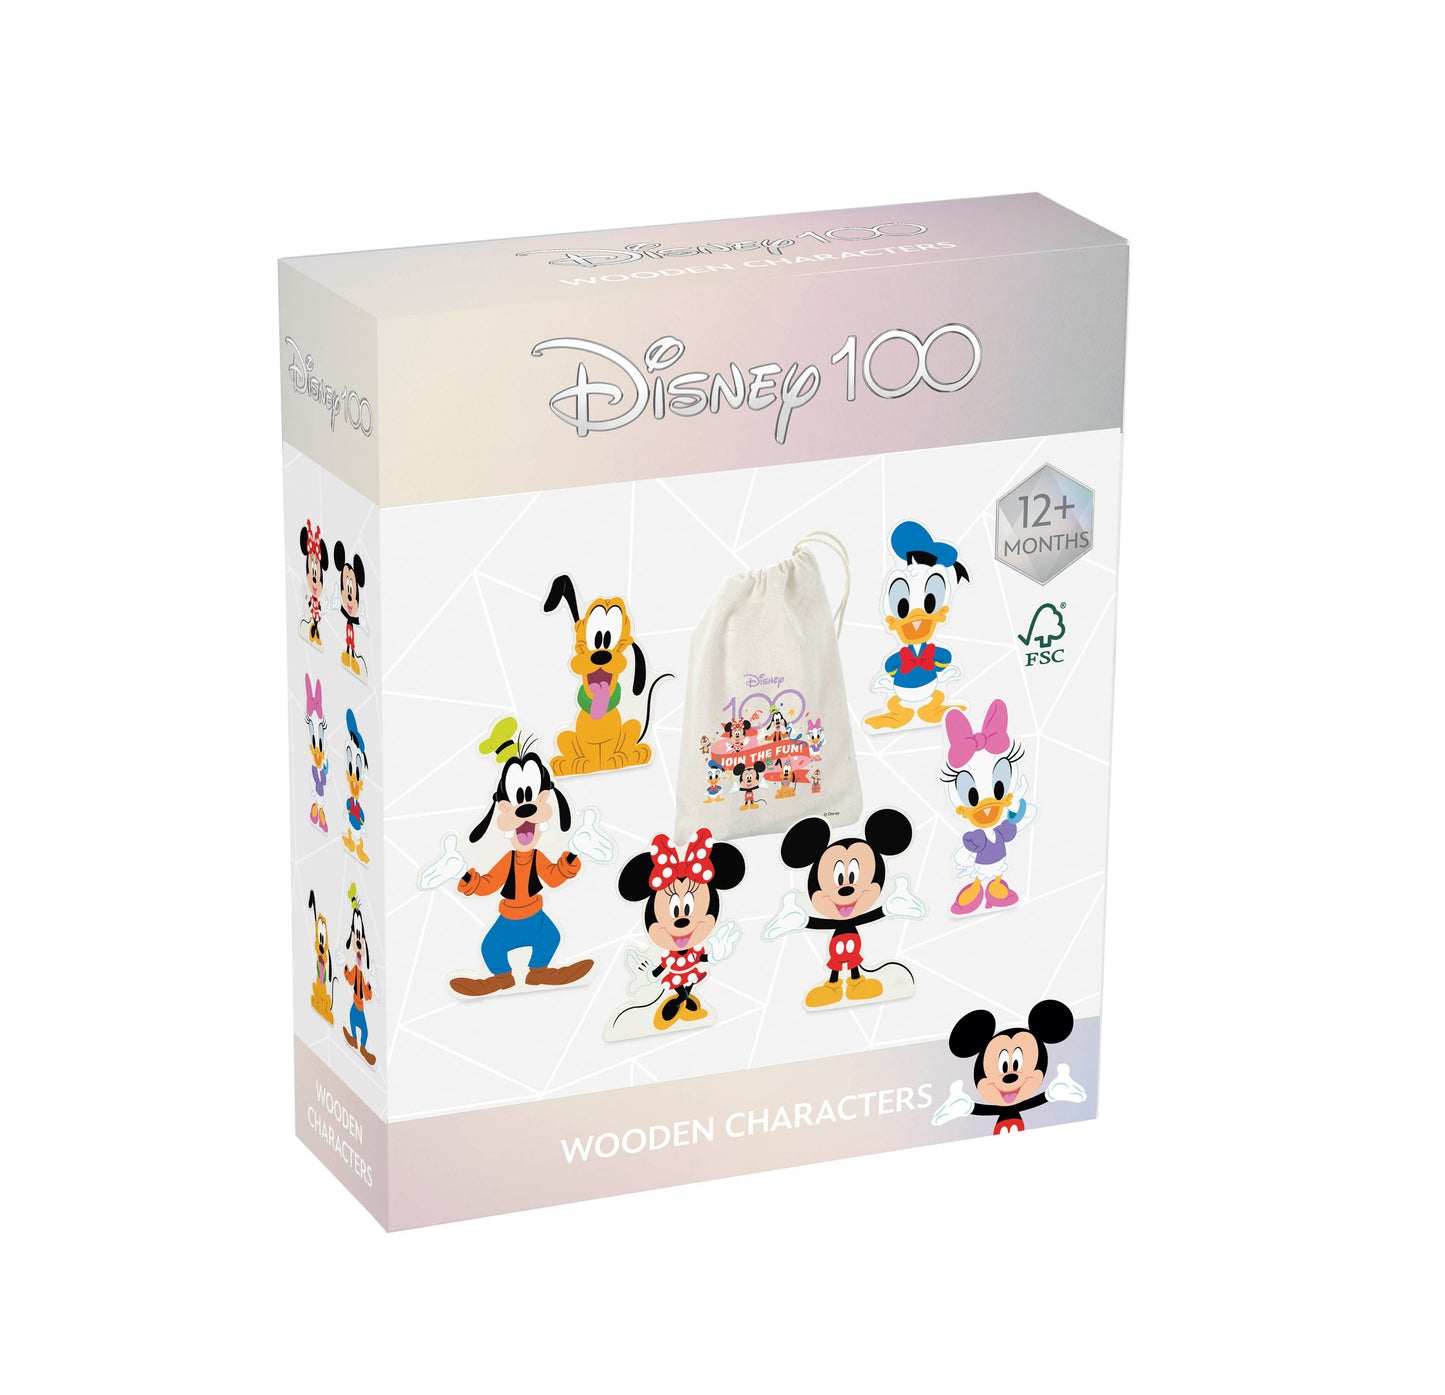 Disney 100 Classic Mickey and Friends Wooden Characters